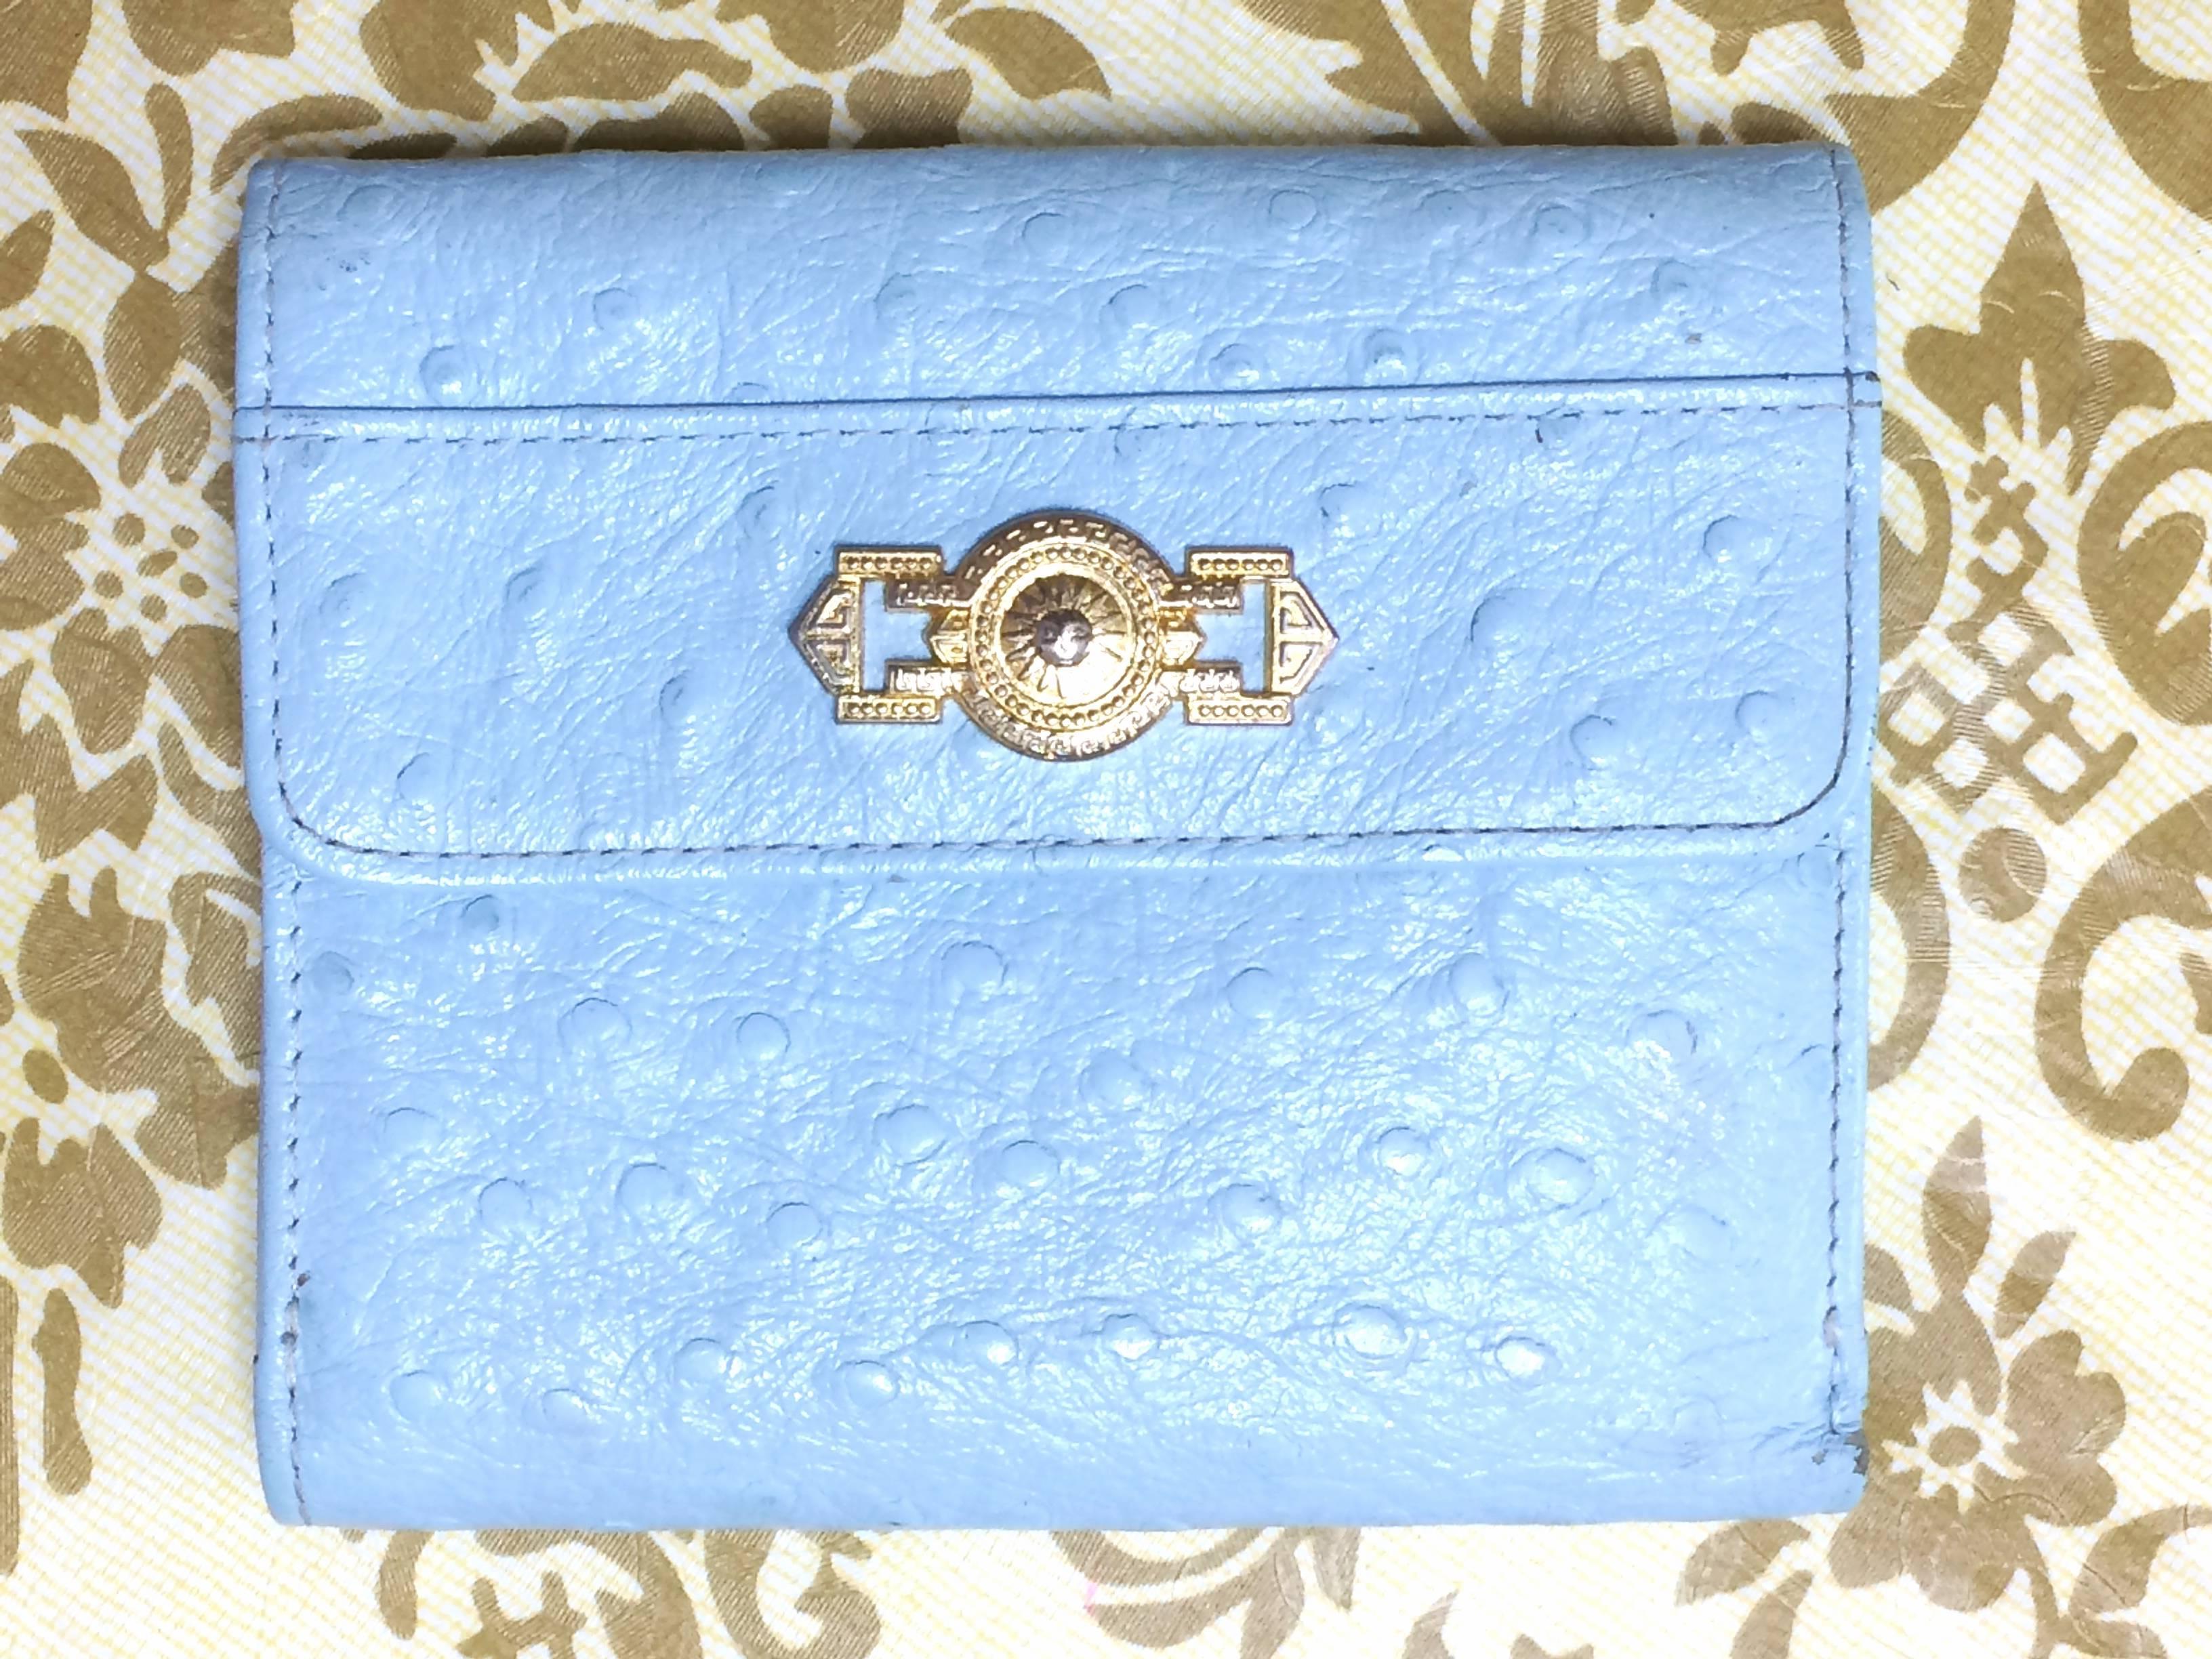 Vintage Gianni Versace ostrich-embossed light blue leather wallet with sunburst For Sale 1